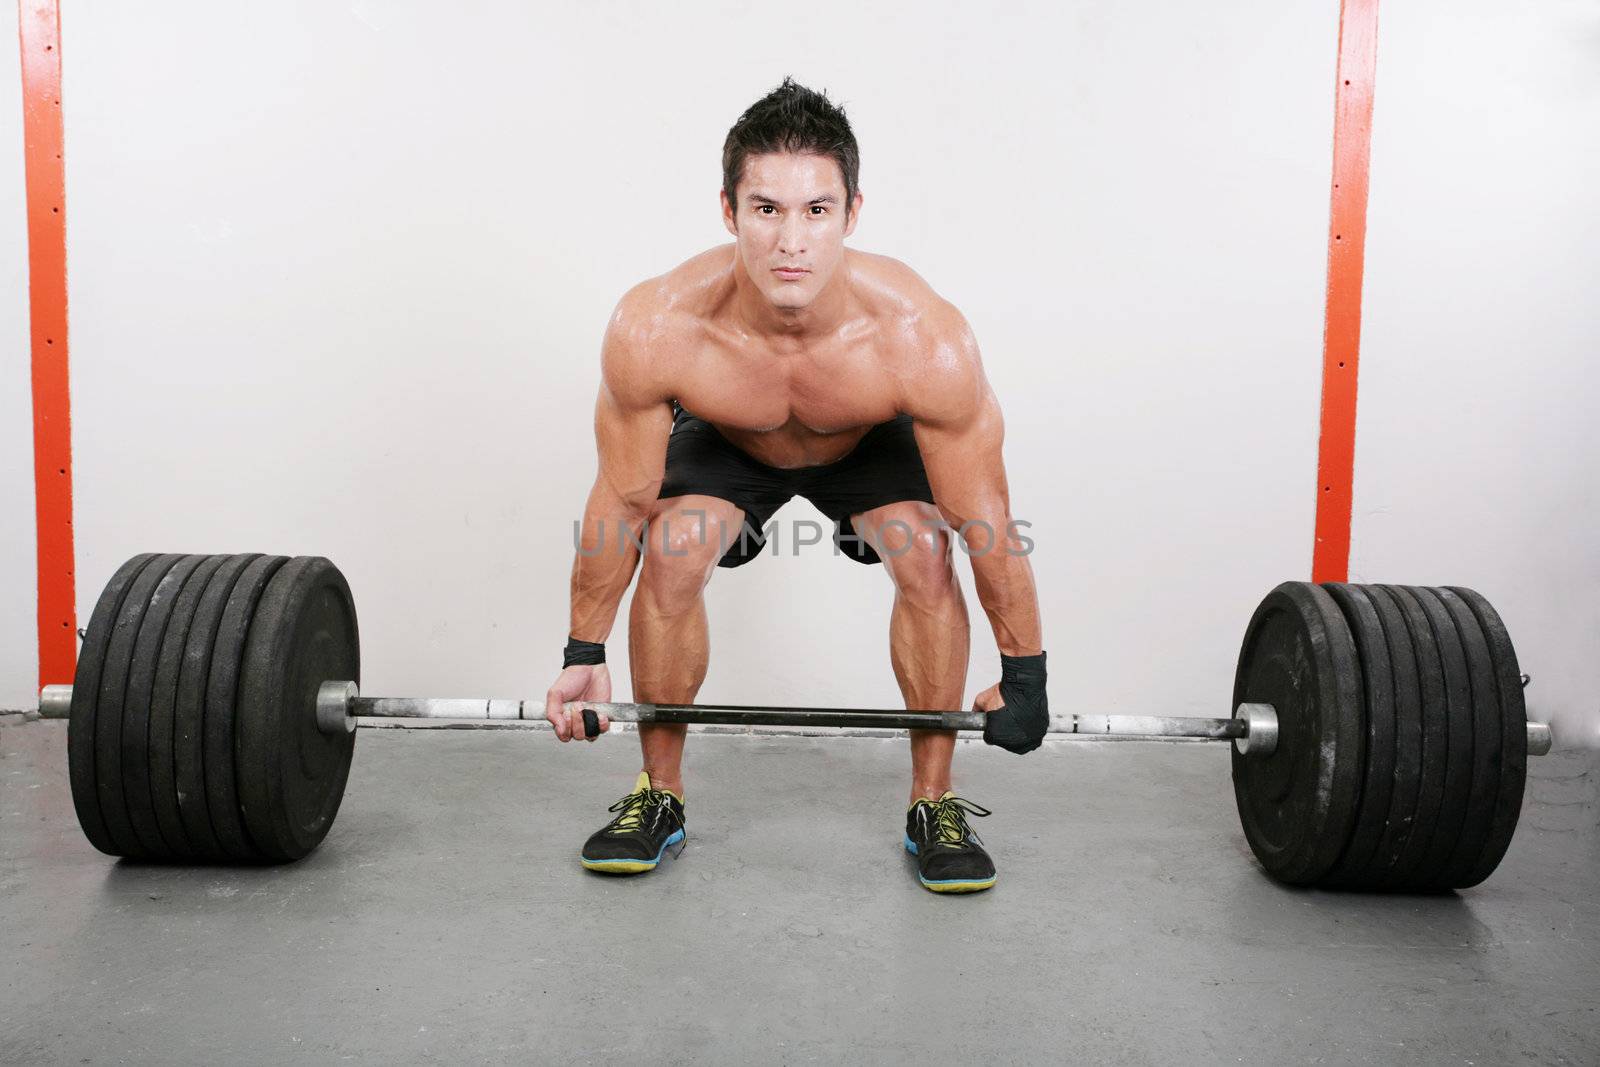 Young and muscular guy holding a barbell. Crossfit dead lift excercise.